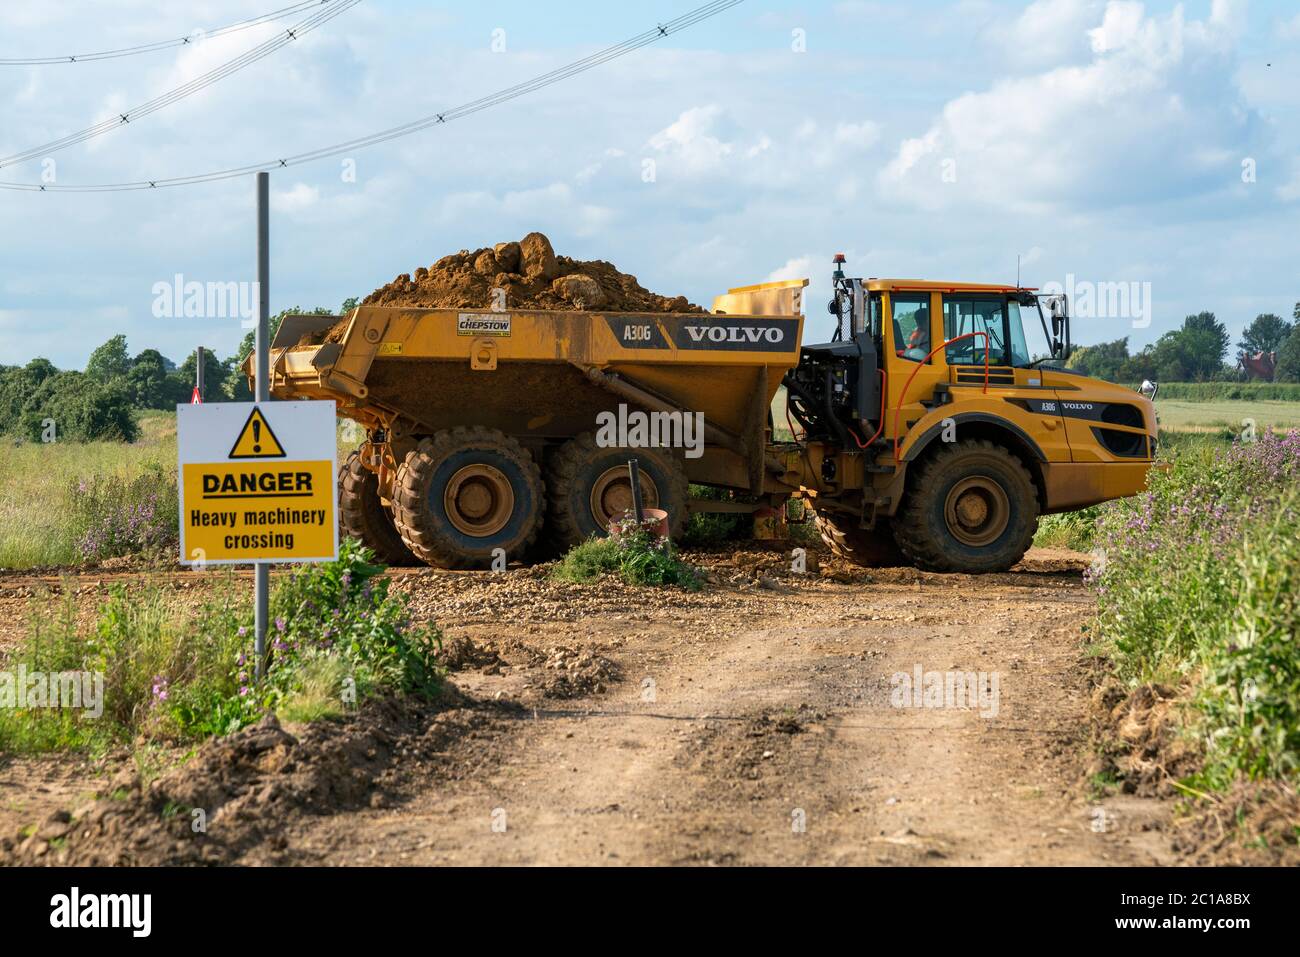 A fully loaded dump truck crosses a dirt path, which is used as a bridleway. To dump it 's load from phase one to phase two to build the mine walls. Stock Photo